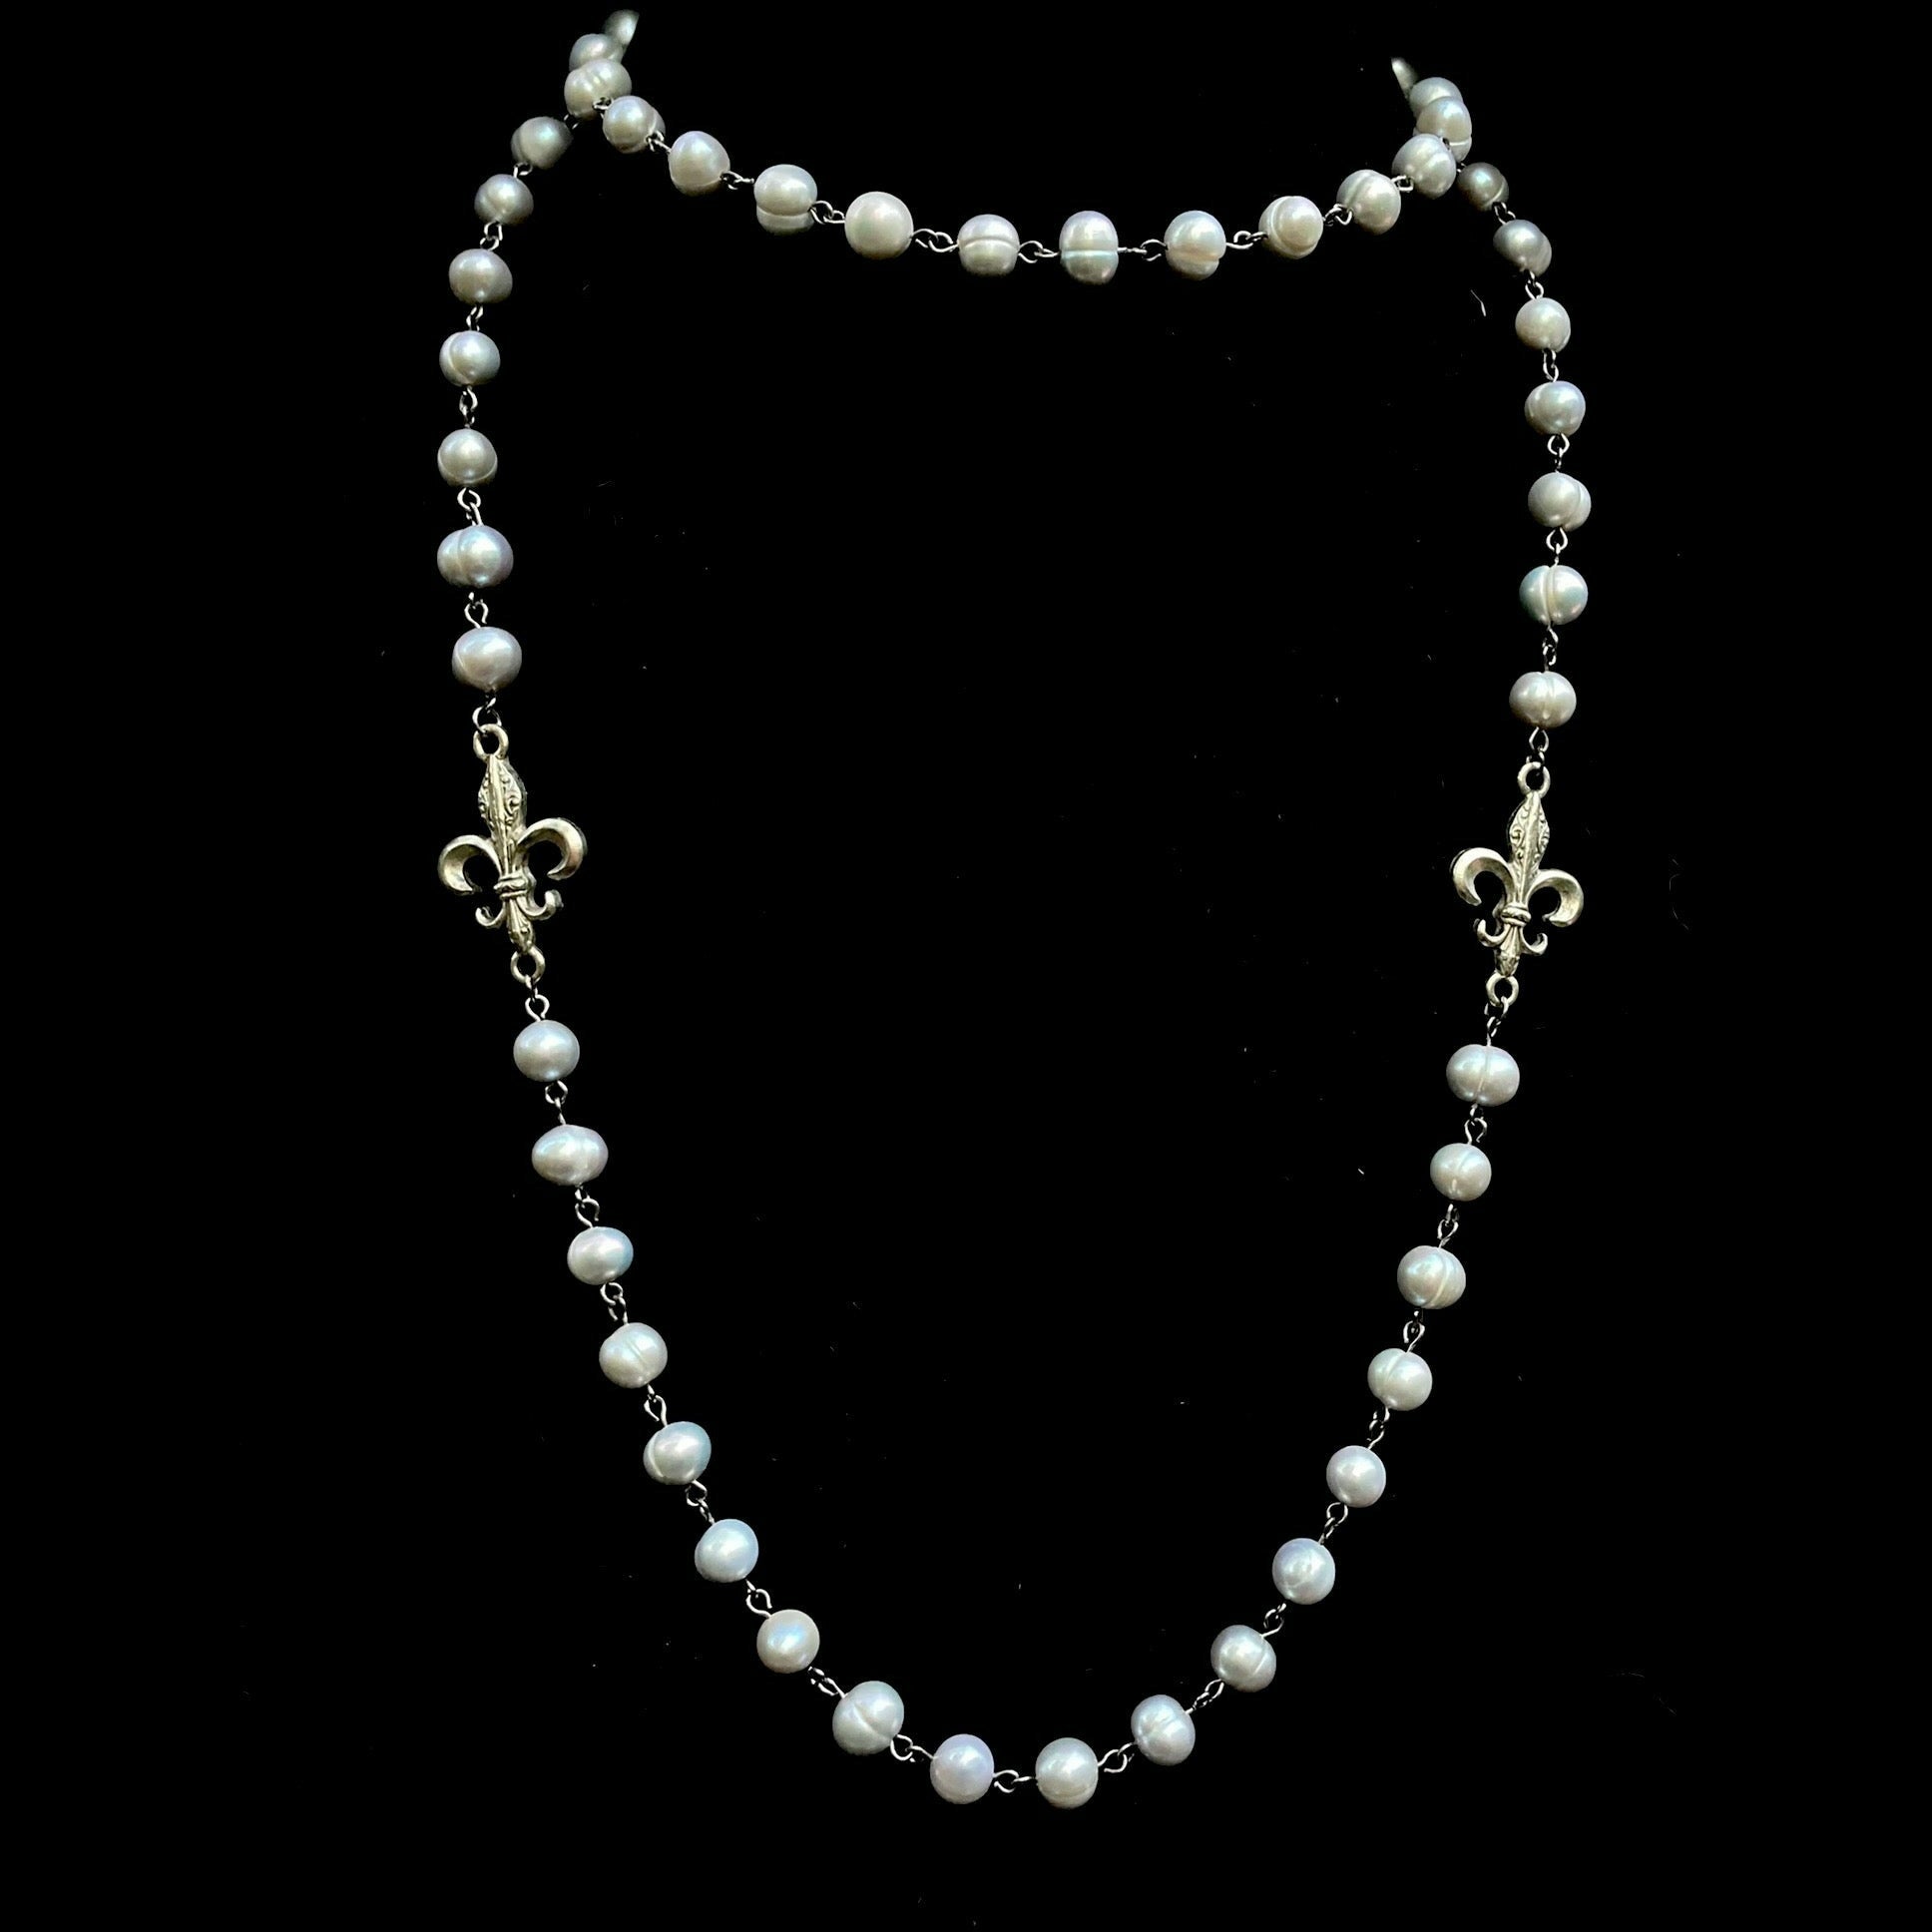 Flower Pearls - Necklace - The Blingspot Studio